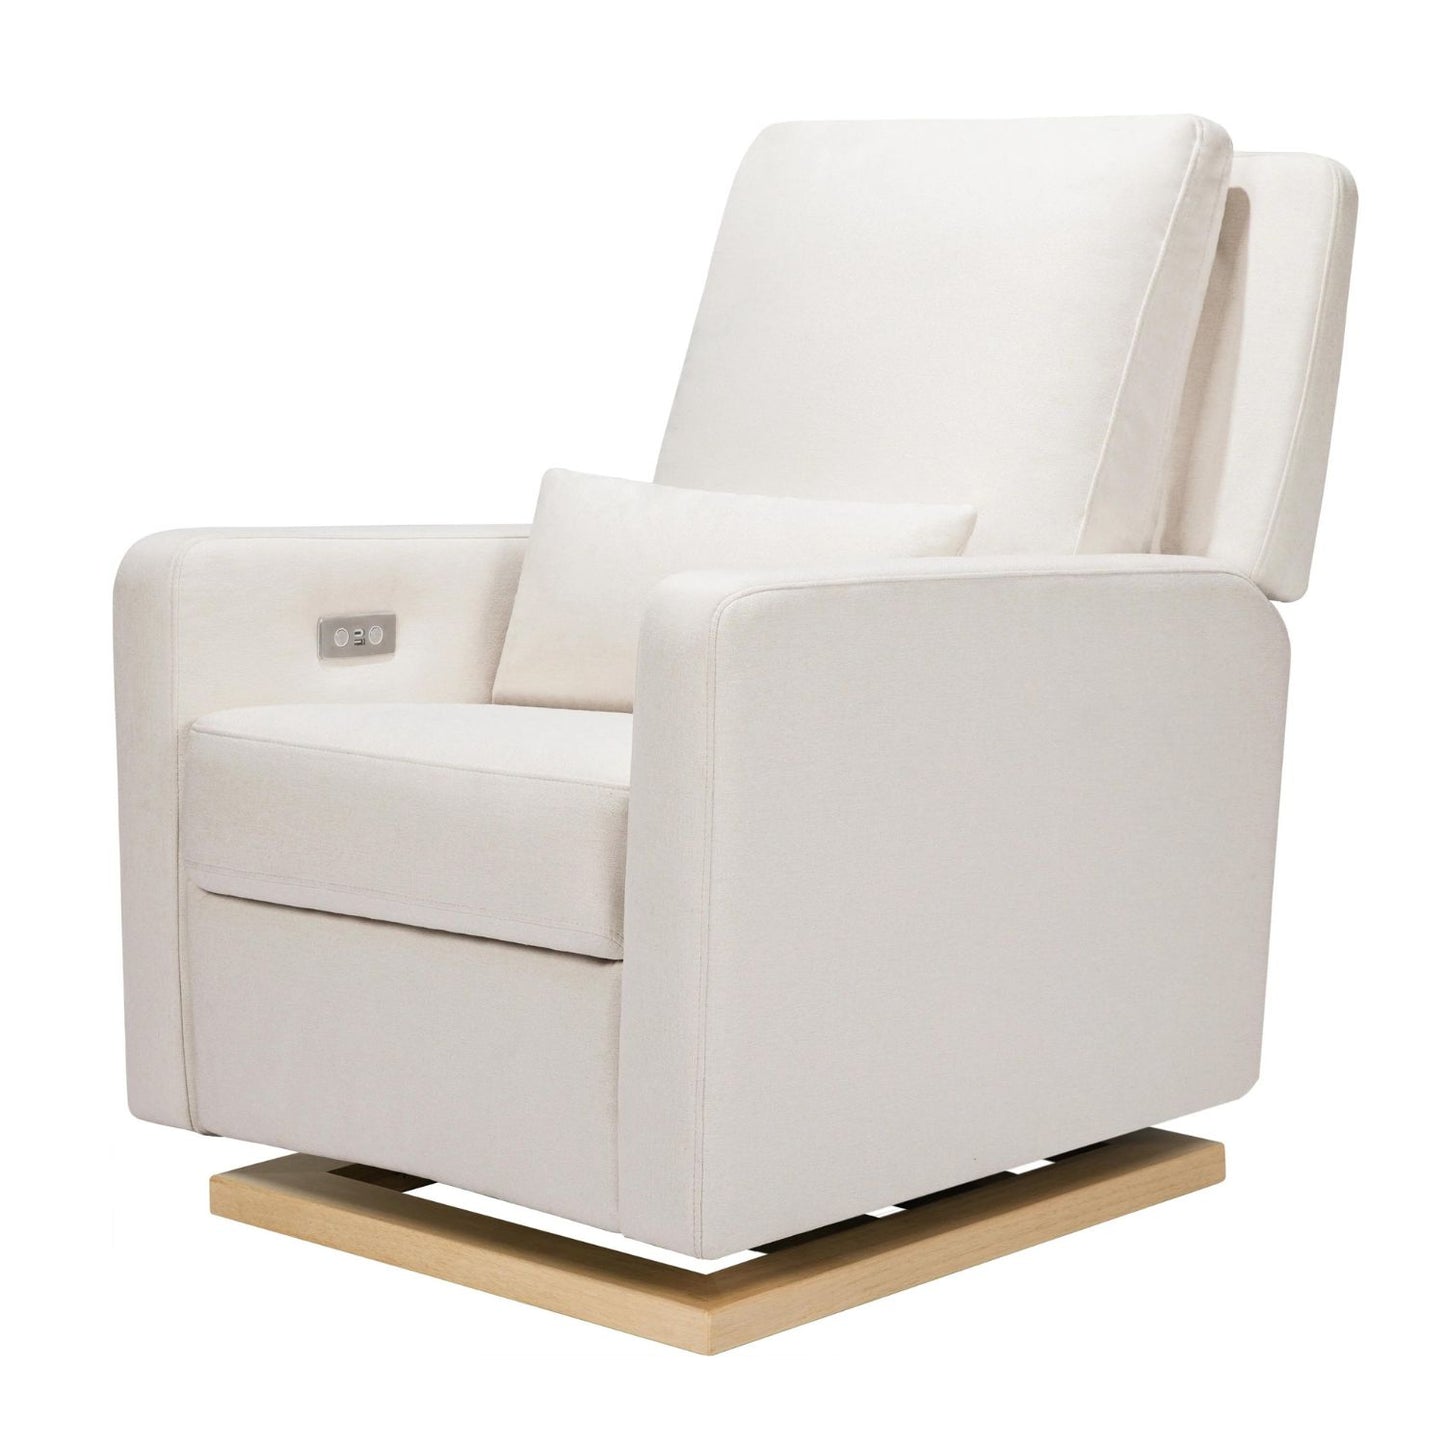 Babyletto Sigi Electronic Recliner and Glider with USB Port - Performance Cream Eco-Weave with Light Wood Base